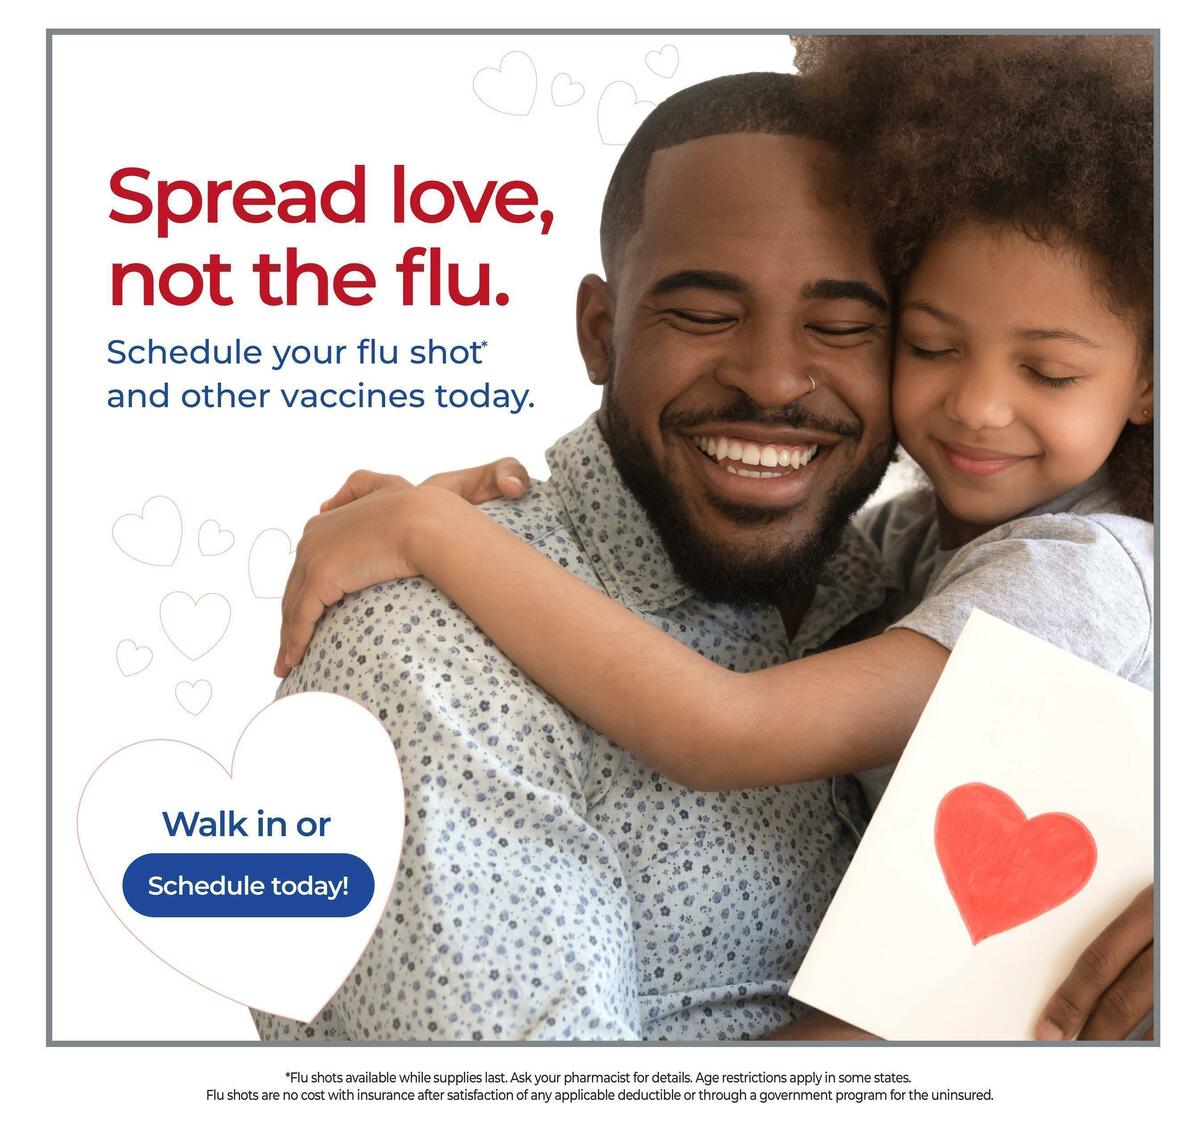 Rite Aid Weekly Ad from February 5